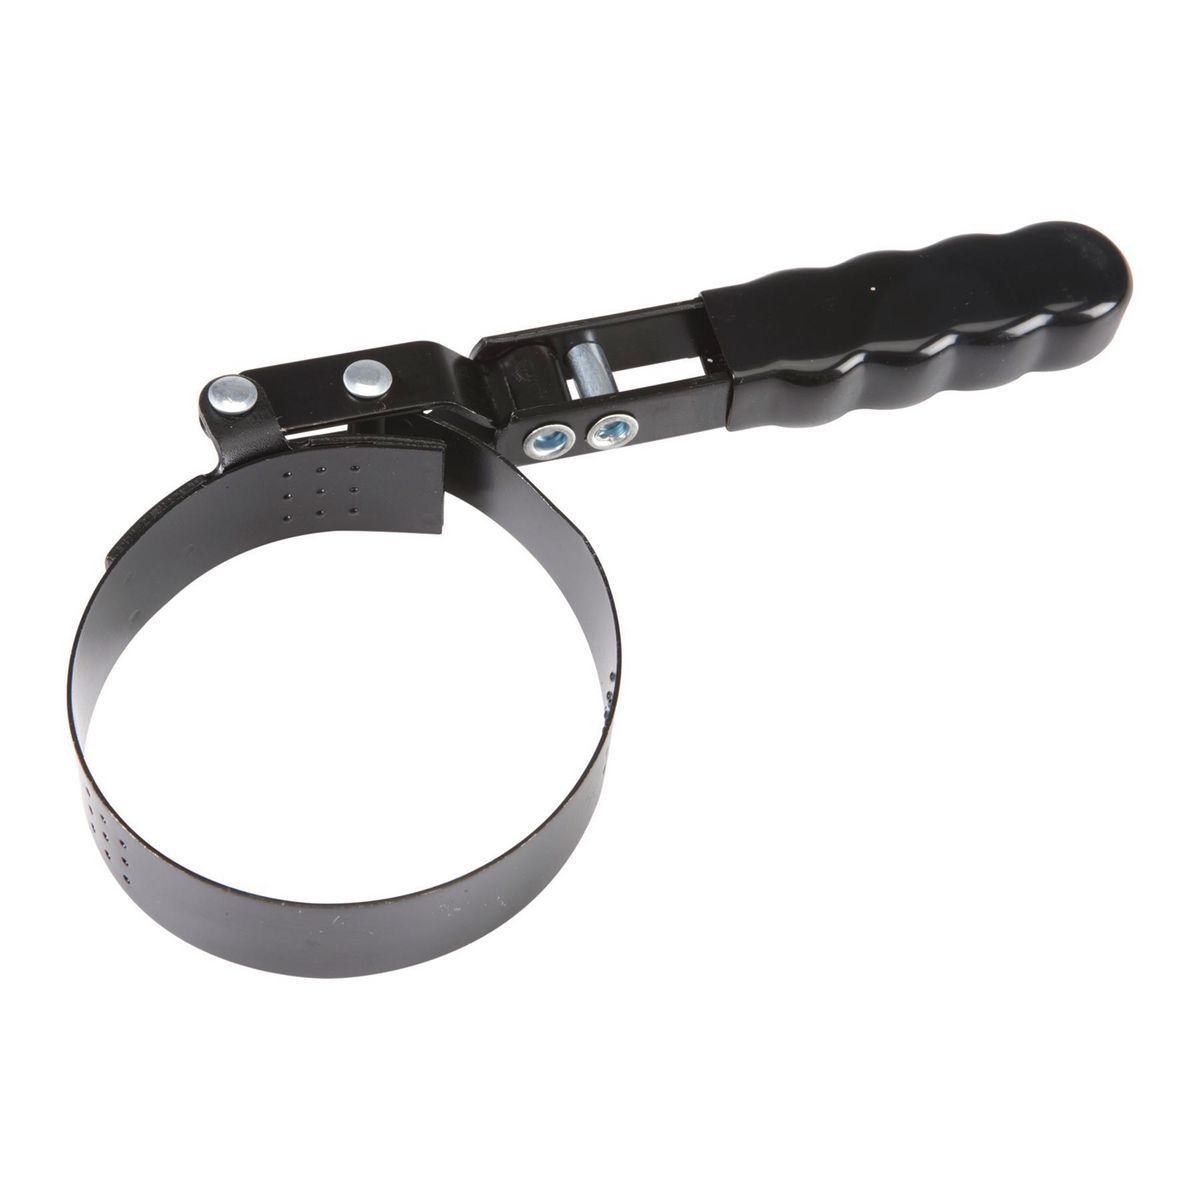 3-3/4 in. Oil Filter Swivel Handle Wrench